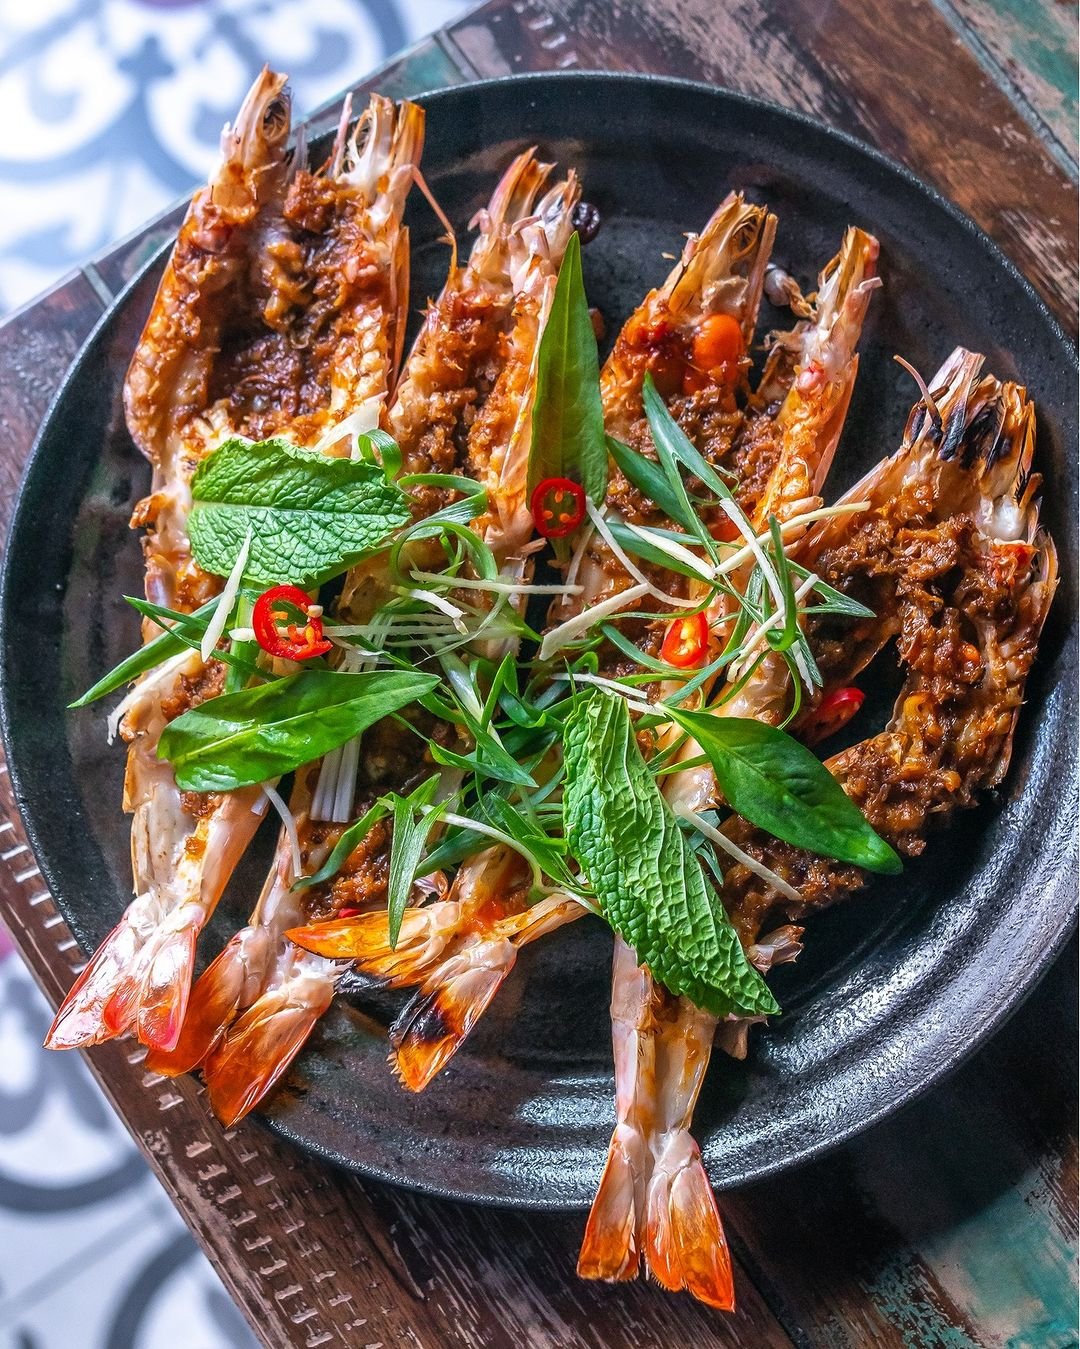 SUCCULENT CHAR GRILLED SKULL ISLAND PRAWNS with a TANTALISING Tomato &amp; Chilli Sambal🦐

LIP SMACKING, MOUTH WATERING, SAVOURY GOODNESS!

The FRESHEST Skull Island King Prawns lathered in a SPICY, UMAMI-TASTIC Sambal Butter.

GET YOURS TONIGHT via